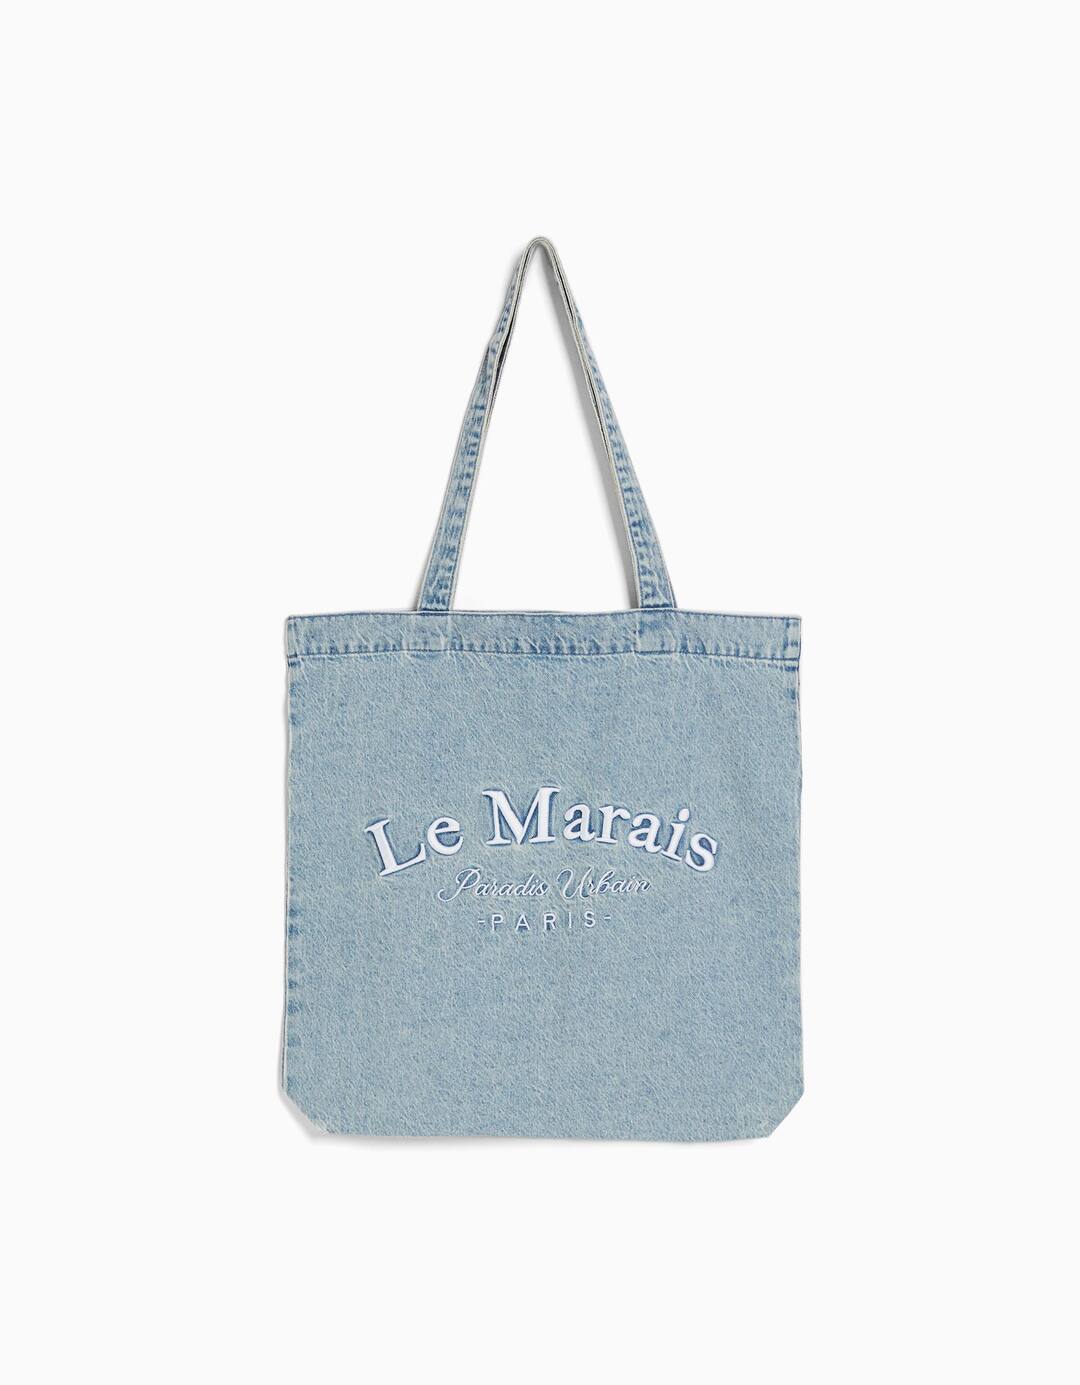 Tote bag with slogan